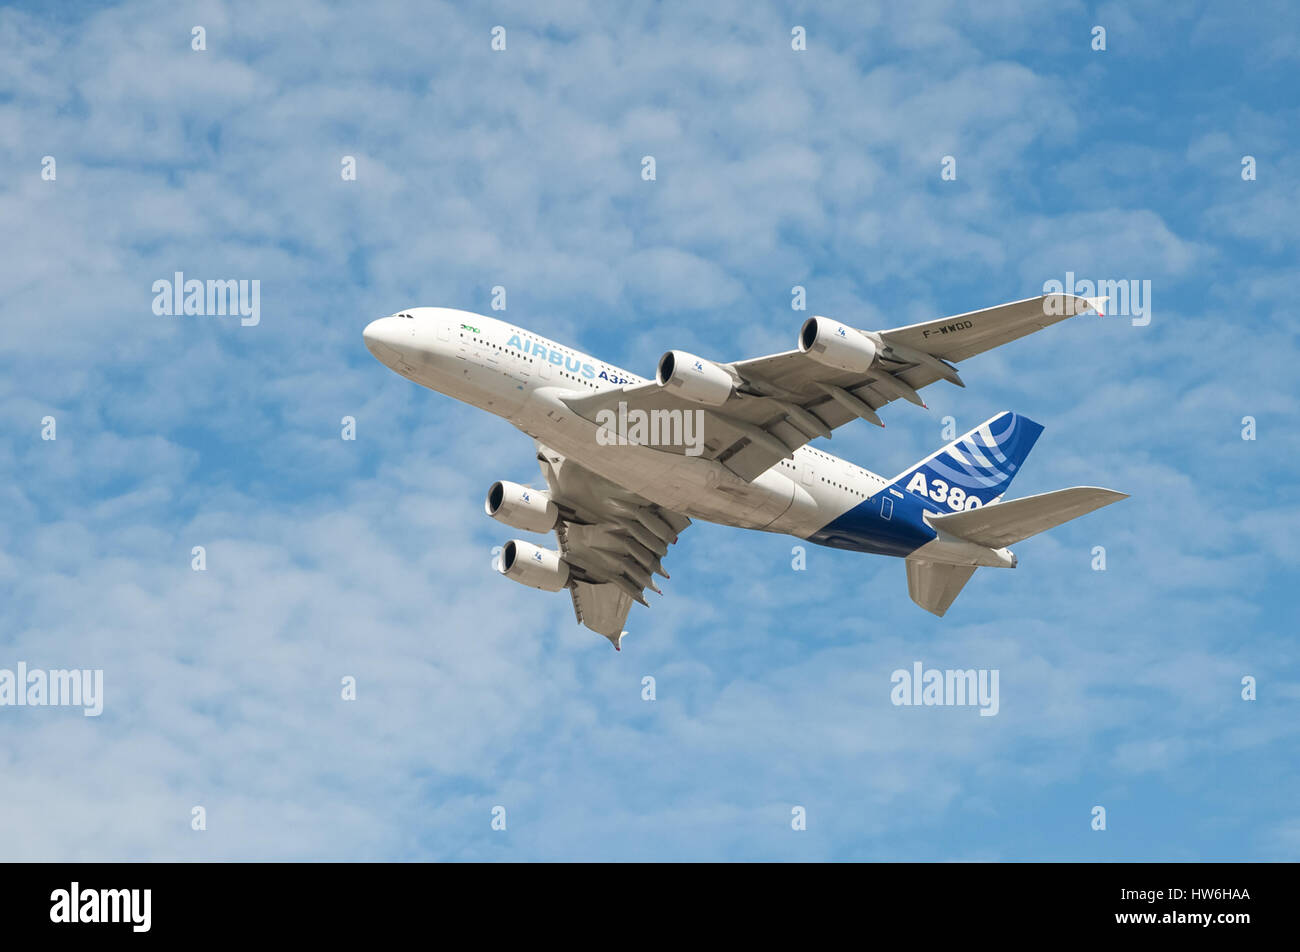 A large Airbus A380 passenger aircraft just after take-off from Farnborough Airport, UK Stock Photo